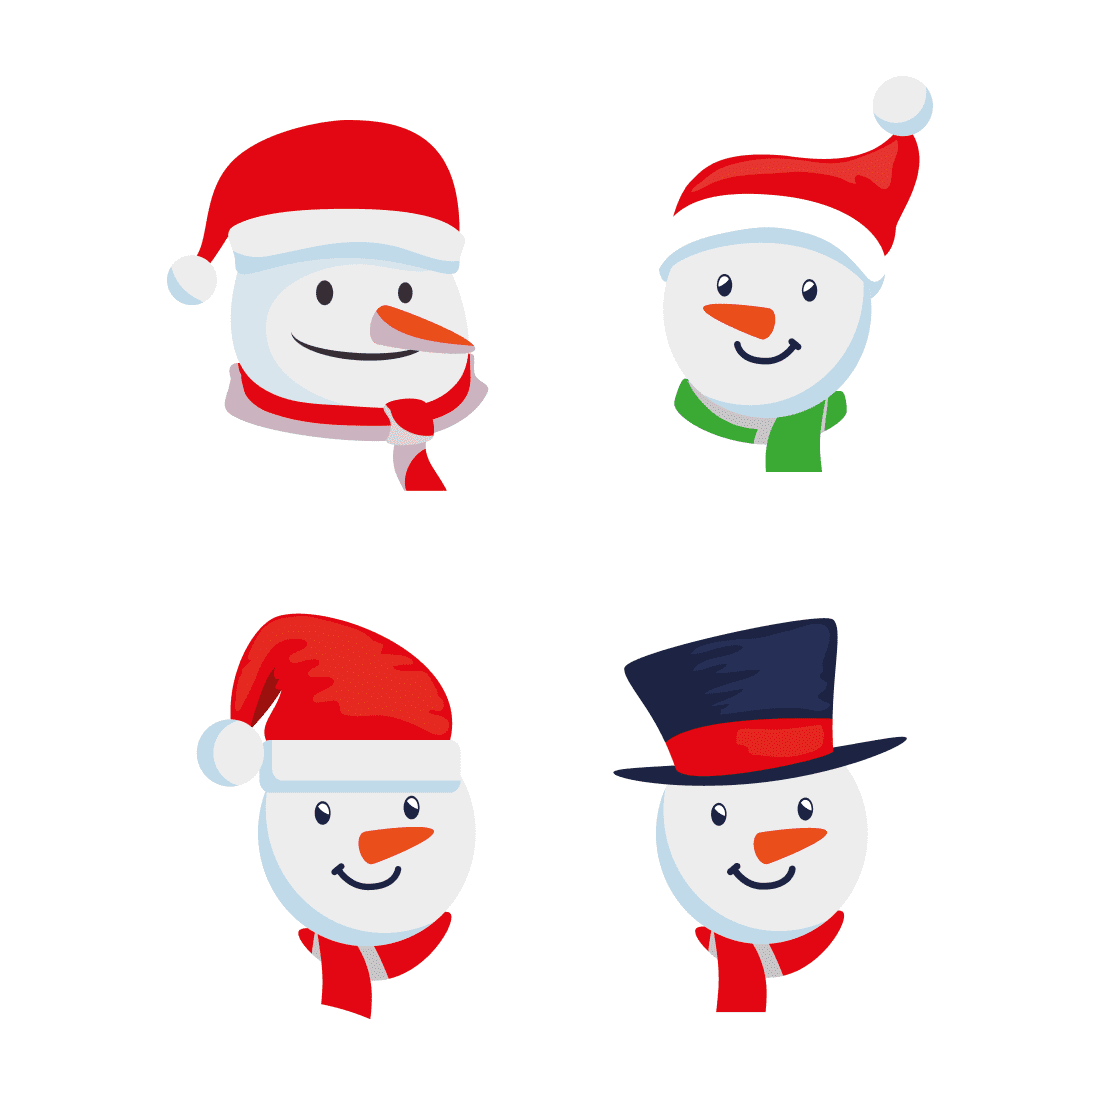 Images of happy faces of snowmen with red long noses.